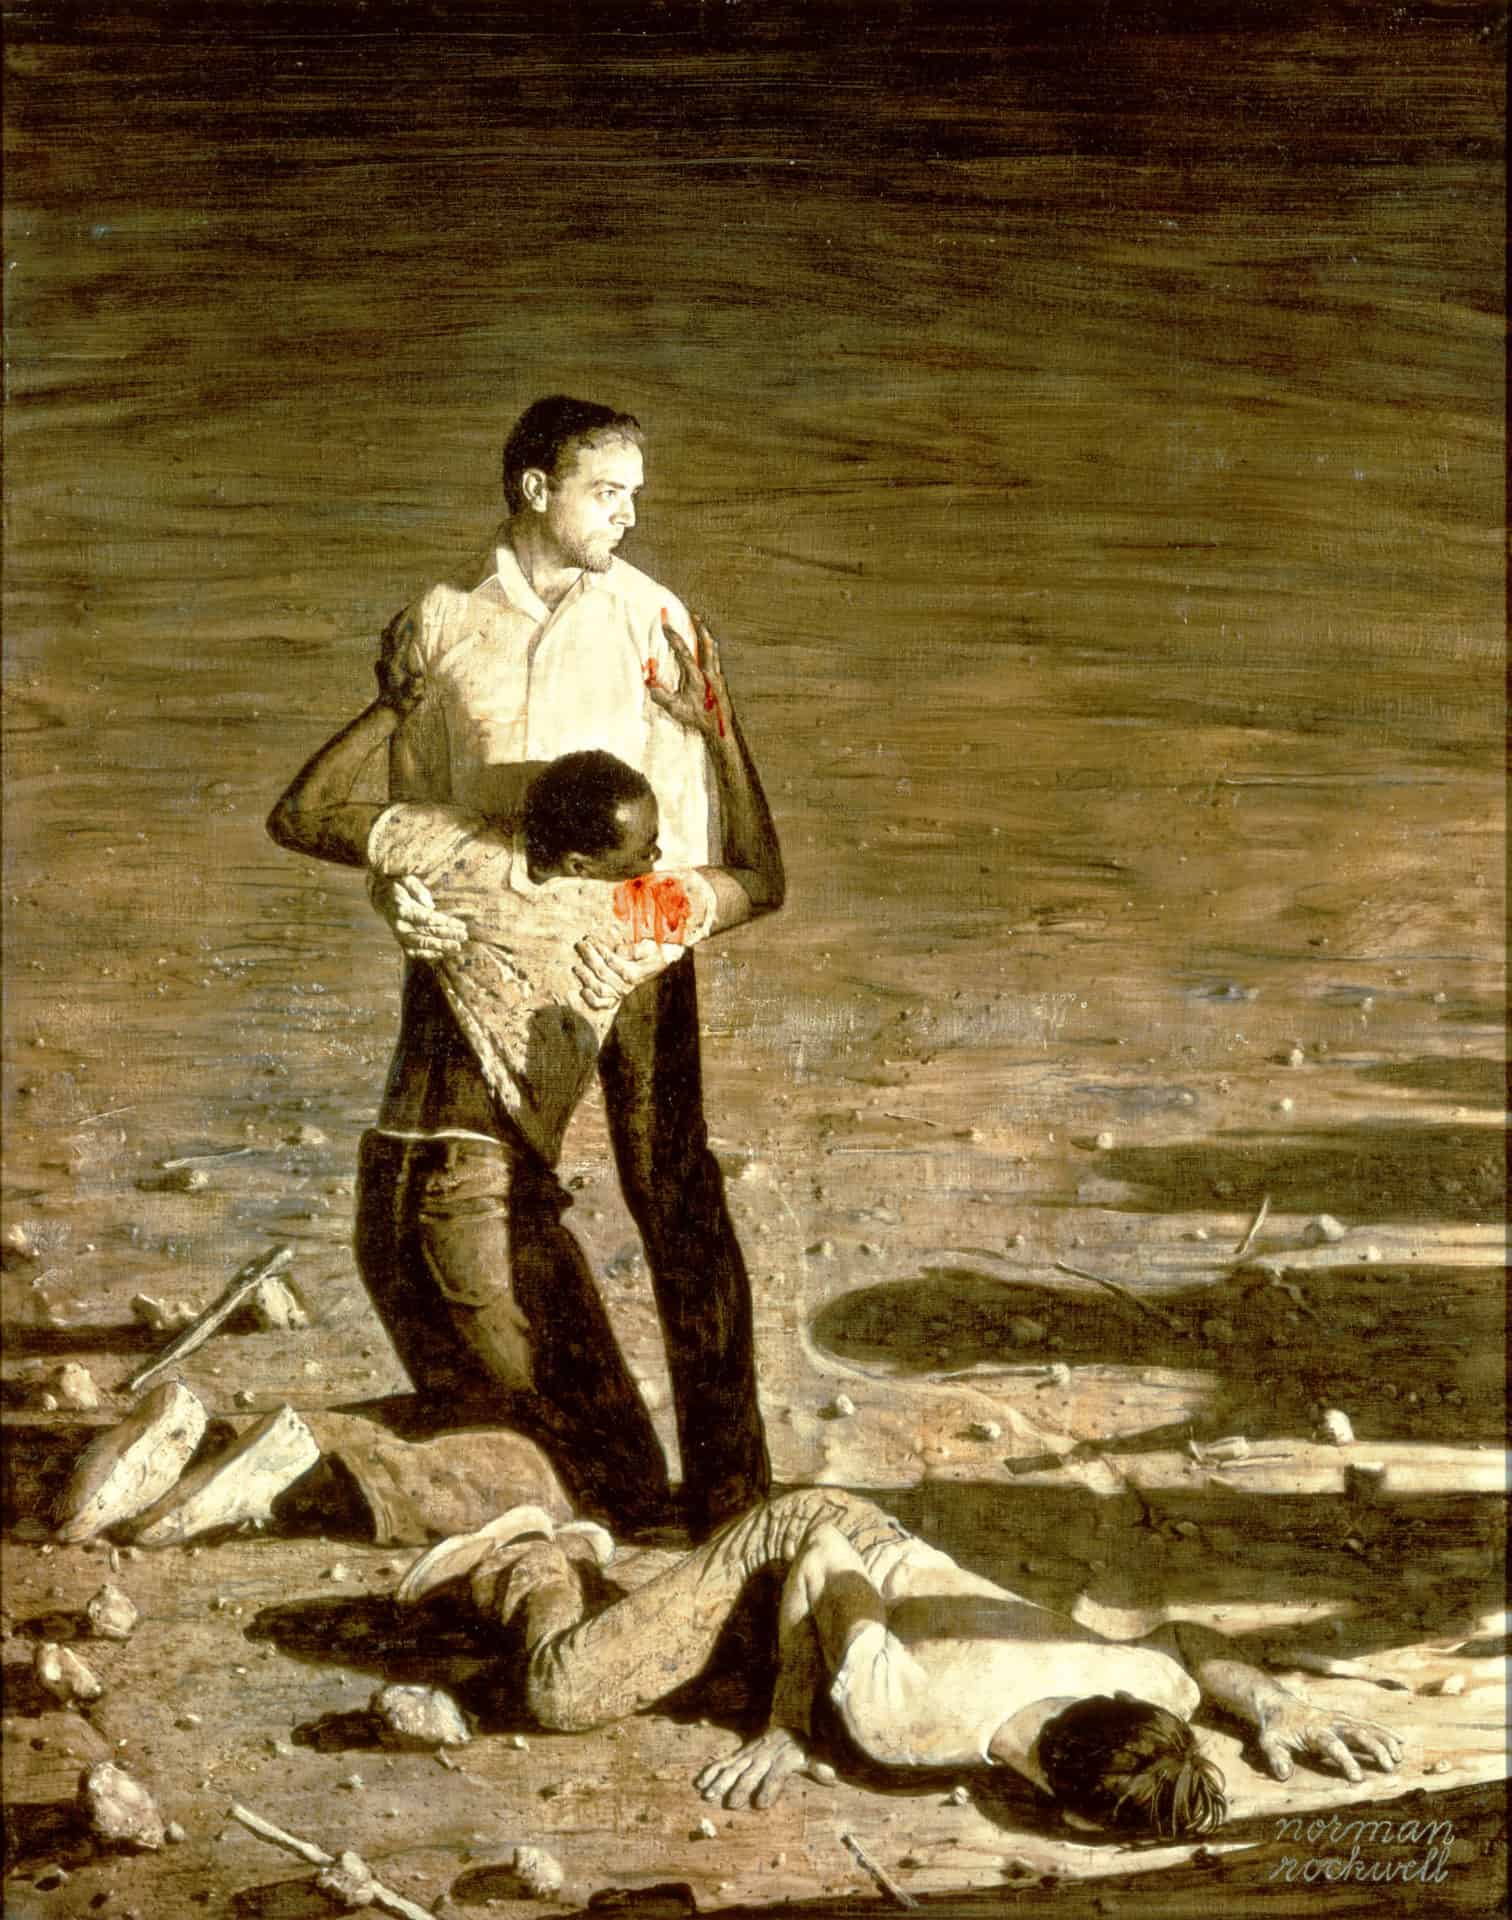 Norman Rockwell captures violence against Civil Rights leaders in Murder in Mississippi, 1965. Press image courtesy of the Norman Rockwell Museum